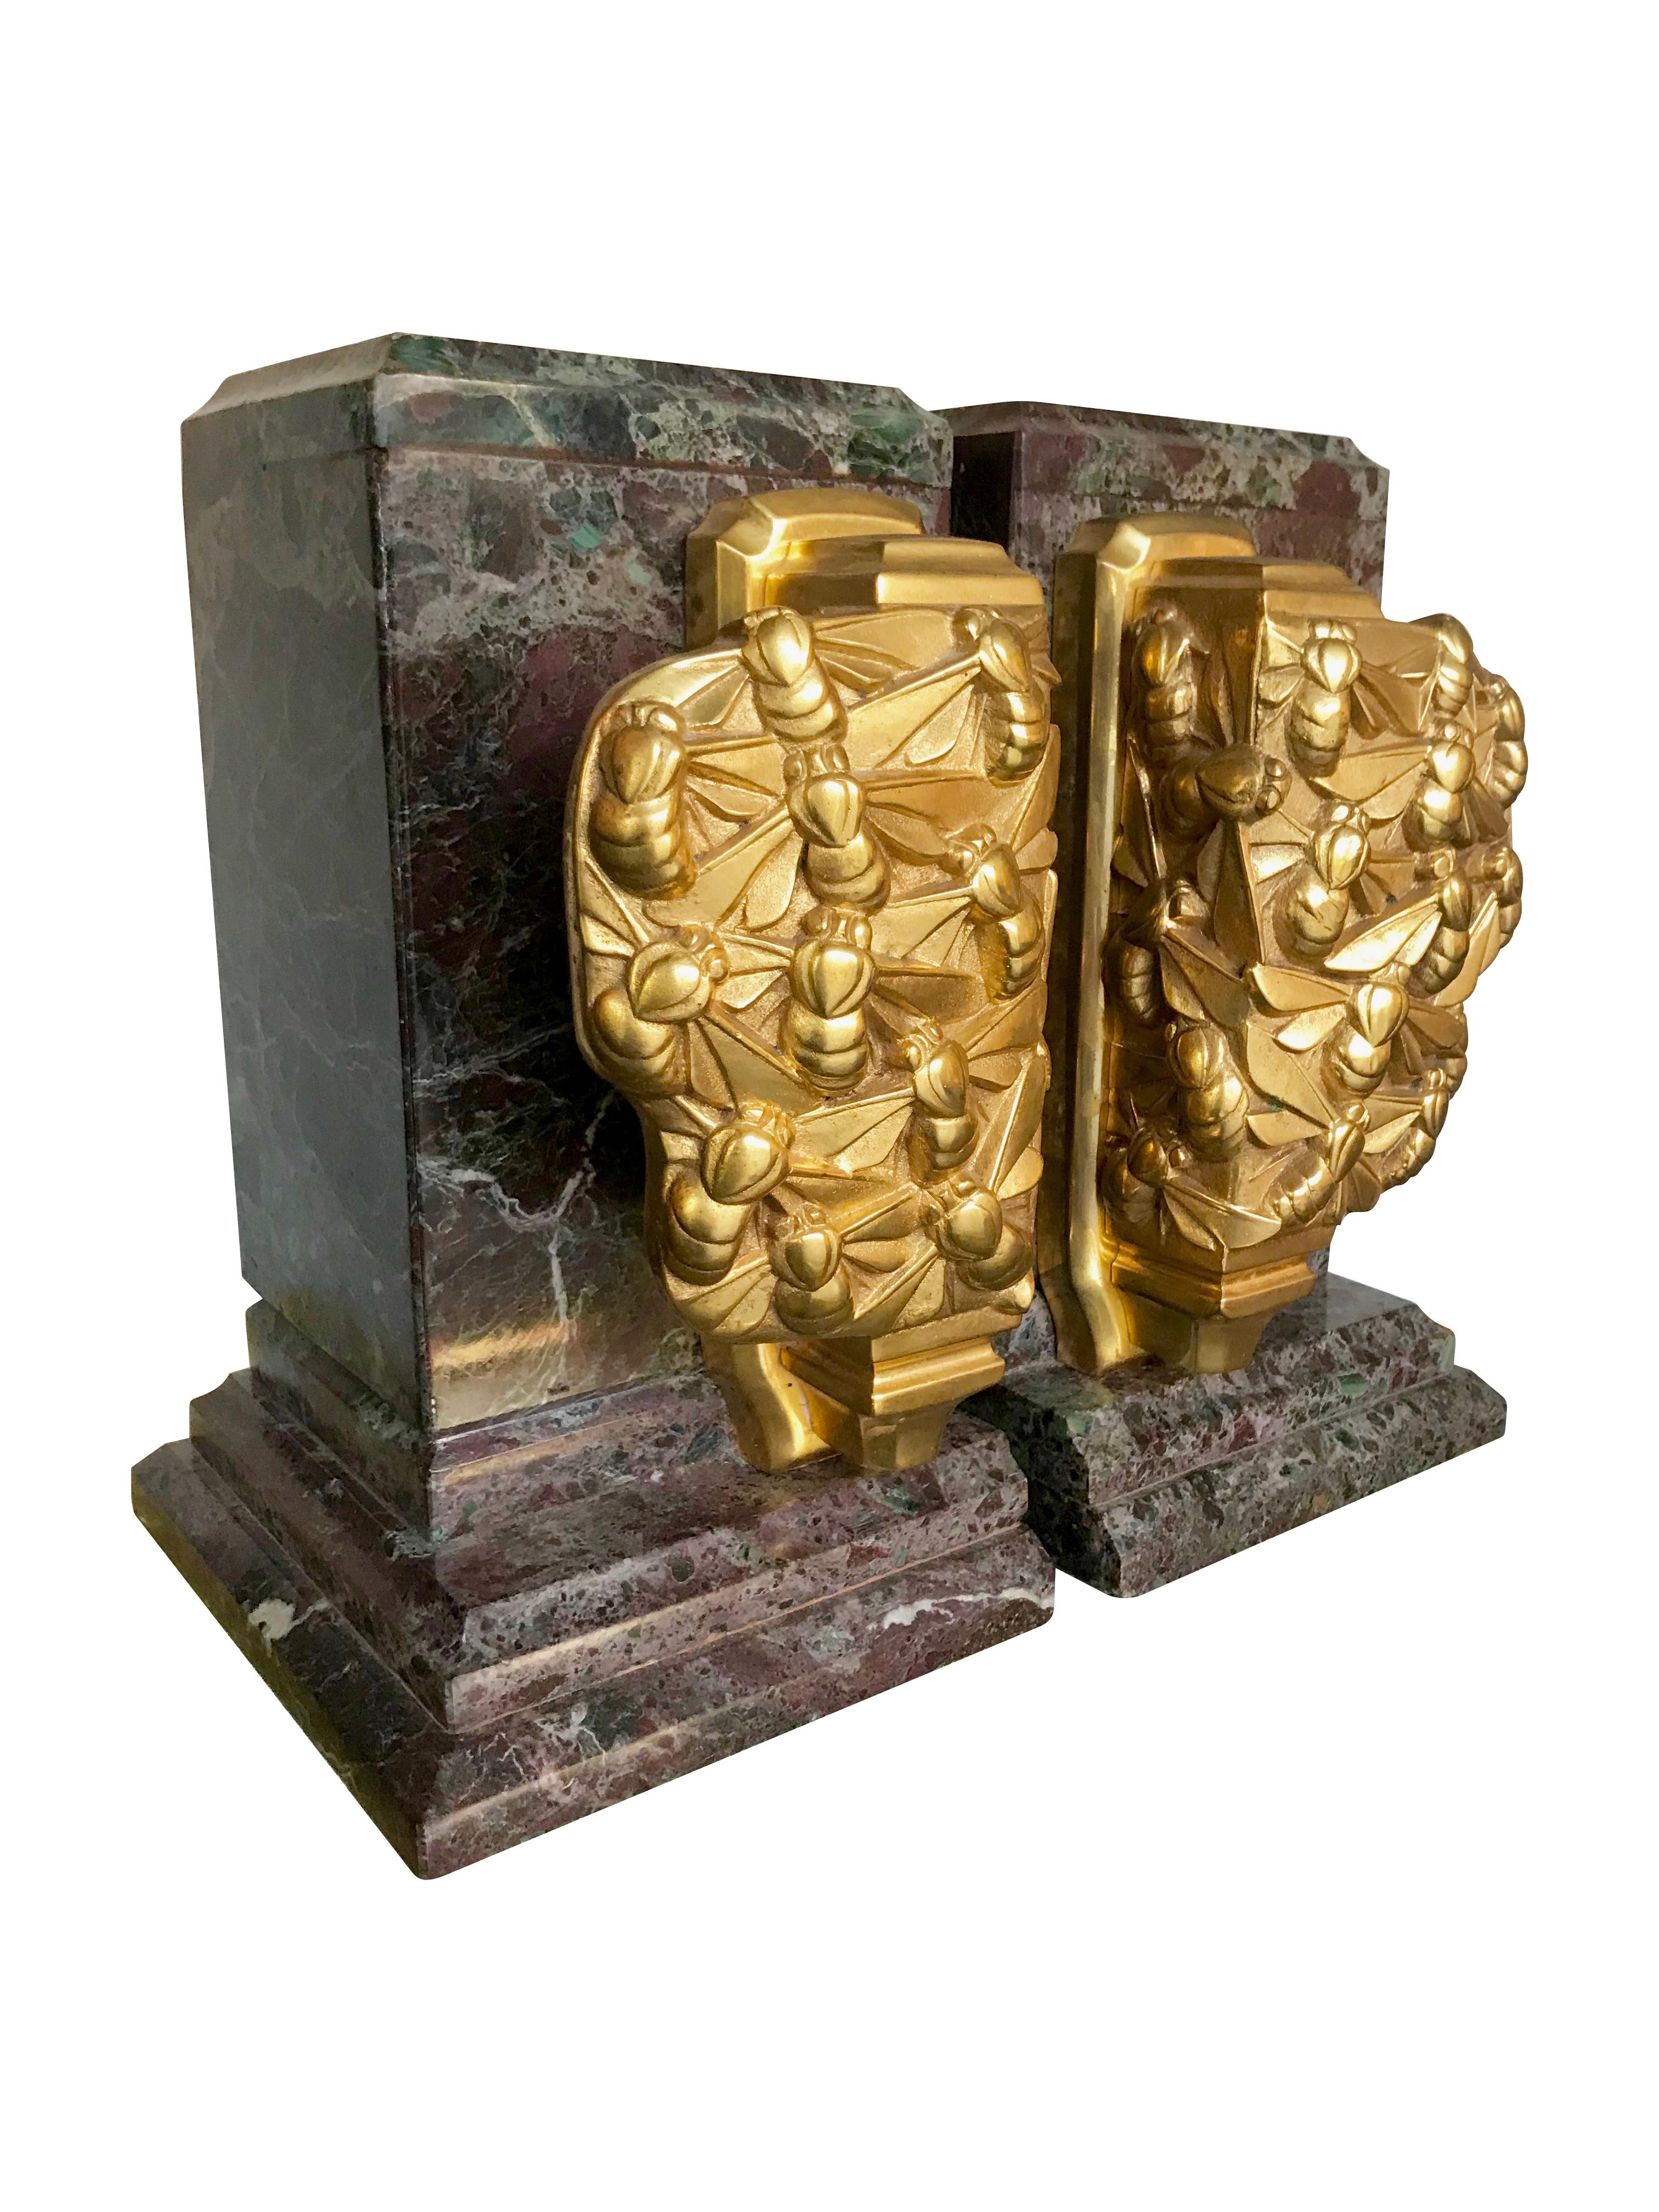 A fantastic pair of Art Deco bookends each with a swarm of gilt metal bees mounted on stunning green and purple amazonite marble.